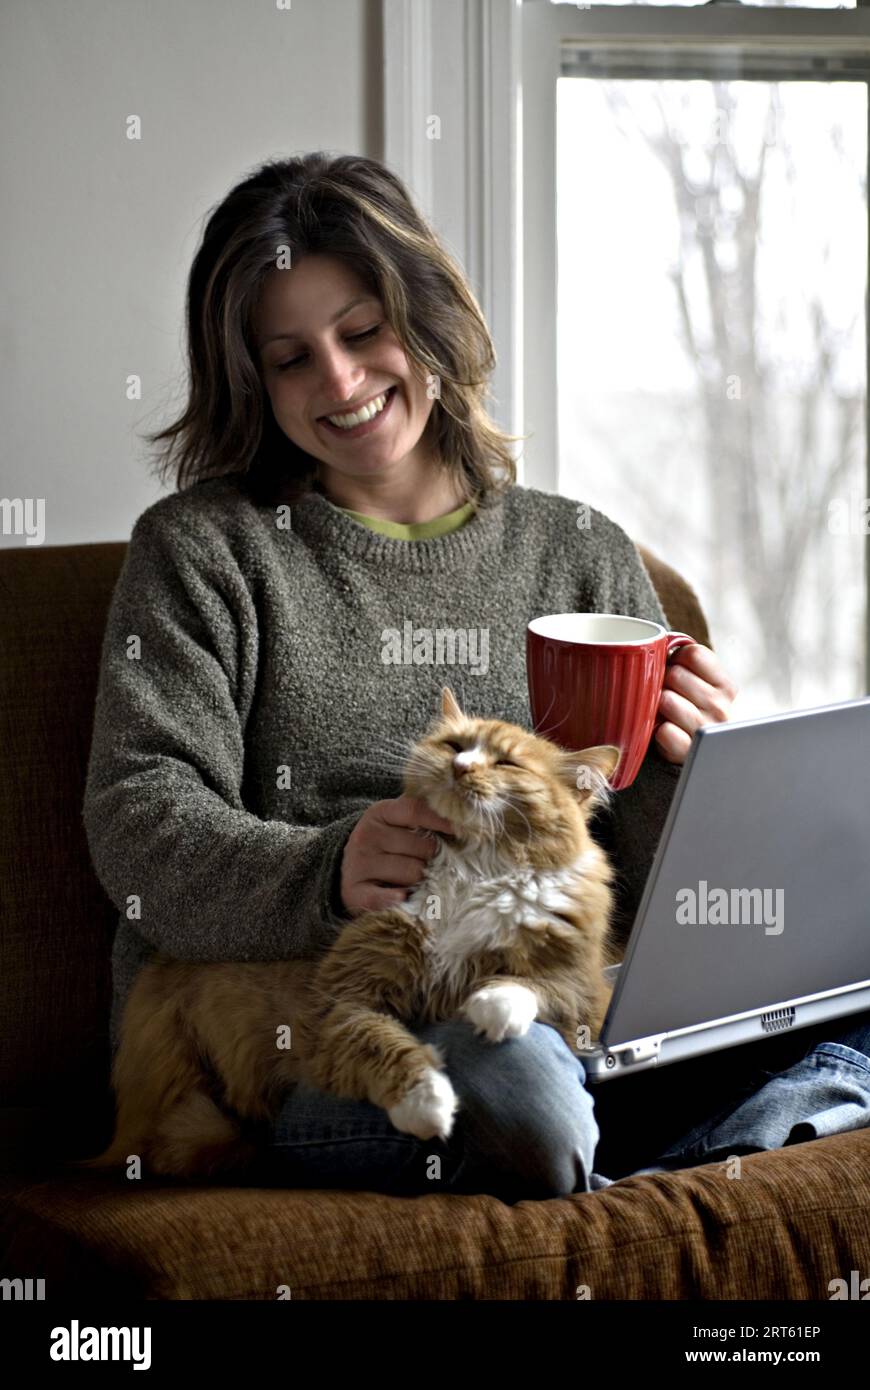 Woman relaxes on a chair with her cat while working on a laptop. Stock Photo